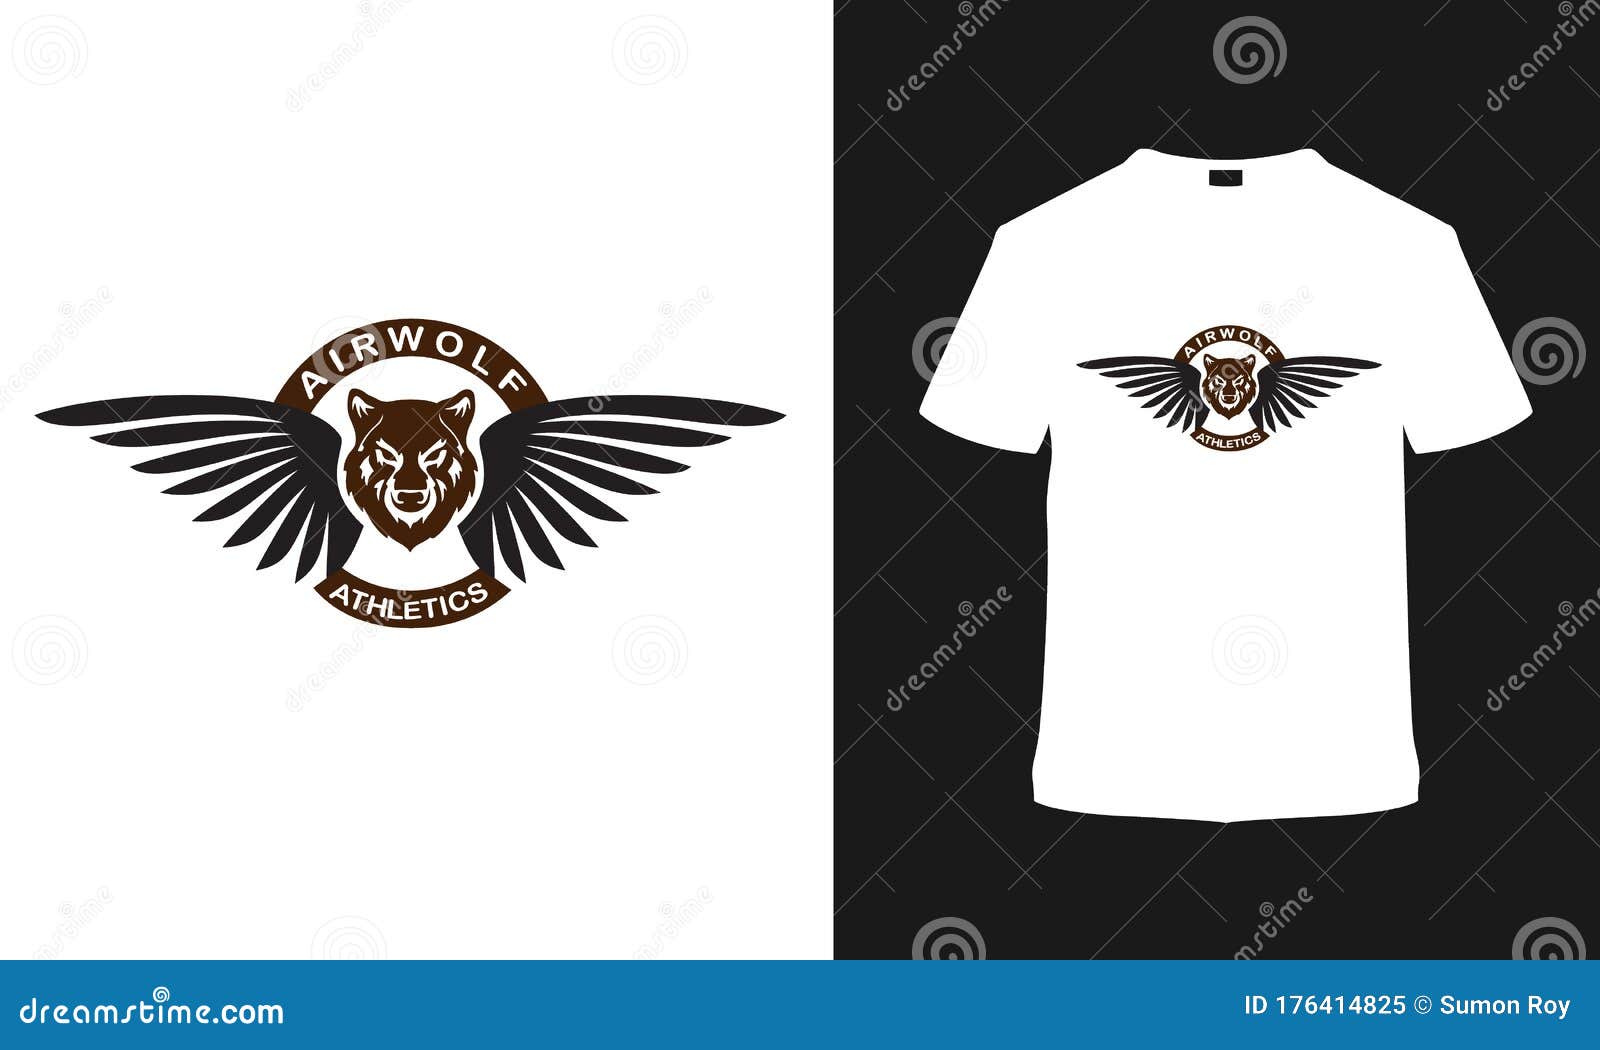 Air Wolf Athletic T Shirt Design, Logo, Template, Stock ...